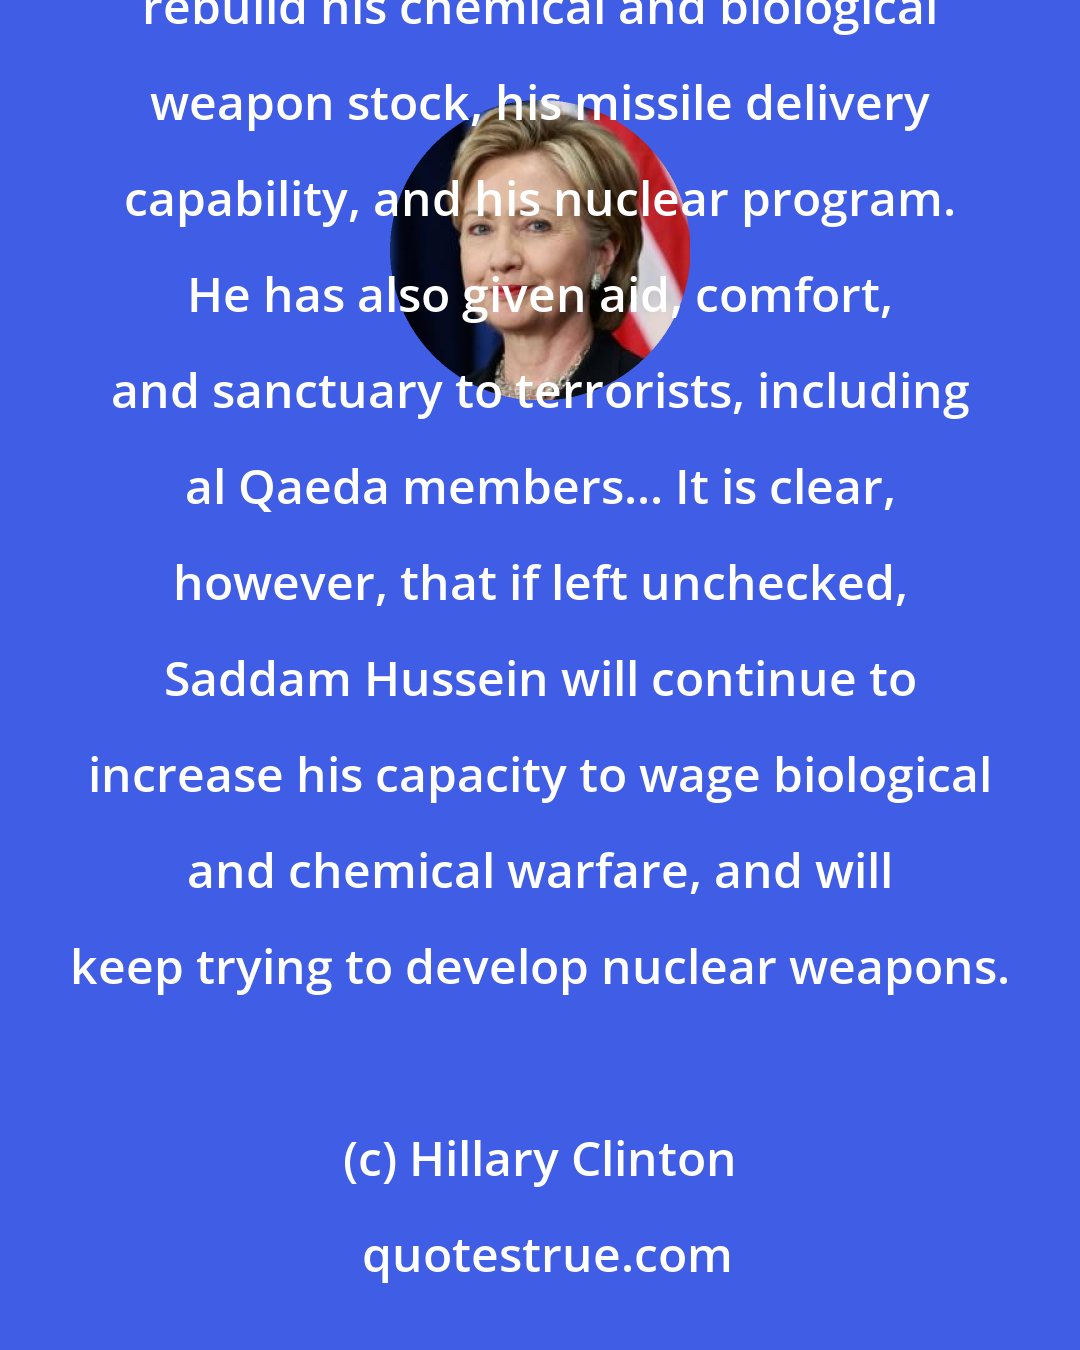 Hillary Clinton: In the four years since the inspectors left, intelligence reports show that Saddam Hussein has worked to rebuild his chemical and biological weapon stock, his missile delivery capability, and his nuclear program. He has also given aid, comfort, and sanctuary to terrorists, including al Qaeda members... It is clear, however, that if left unchecked, Saddam Hussein will continue to increase his capacity to wage biological and chemical warfare, and will keep trying to develop nuclear weapons.